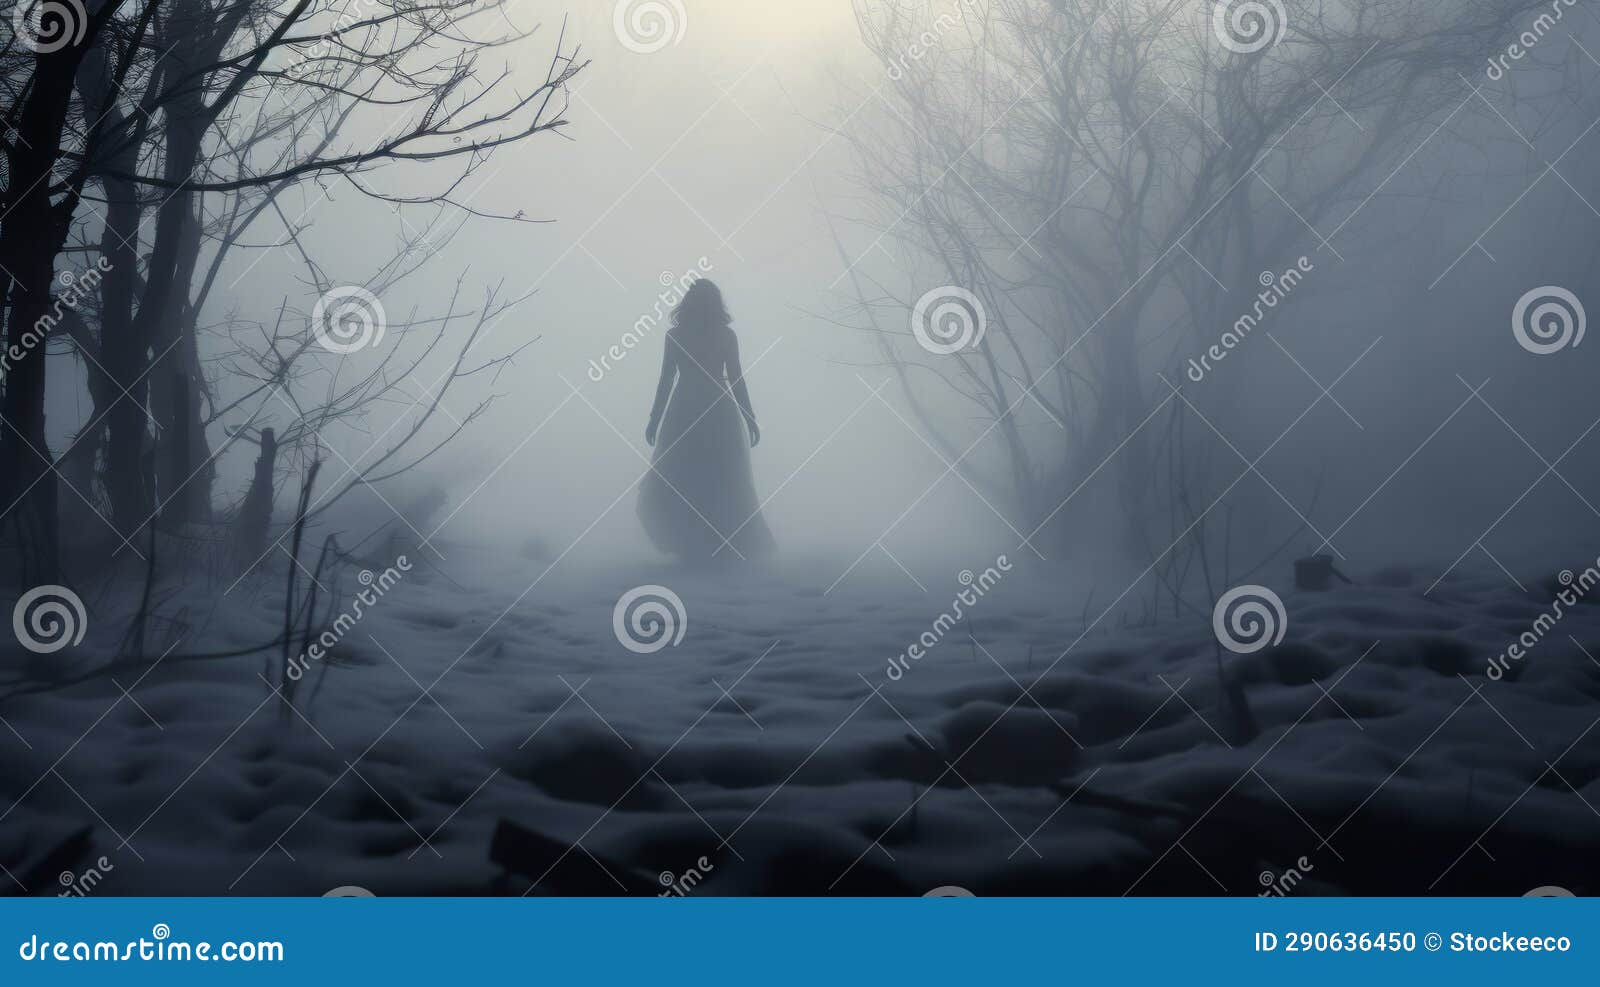 ethereal horror: woman's silhouette emerging from snowy forest